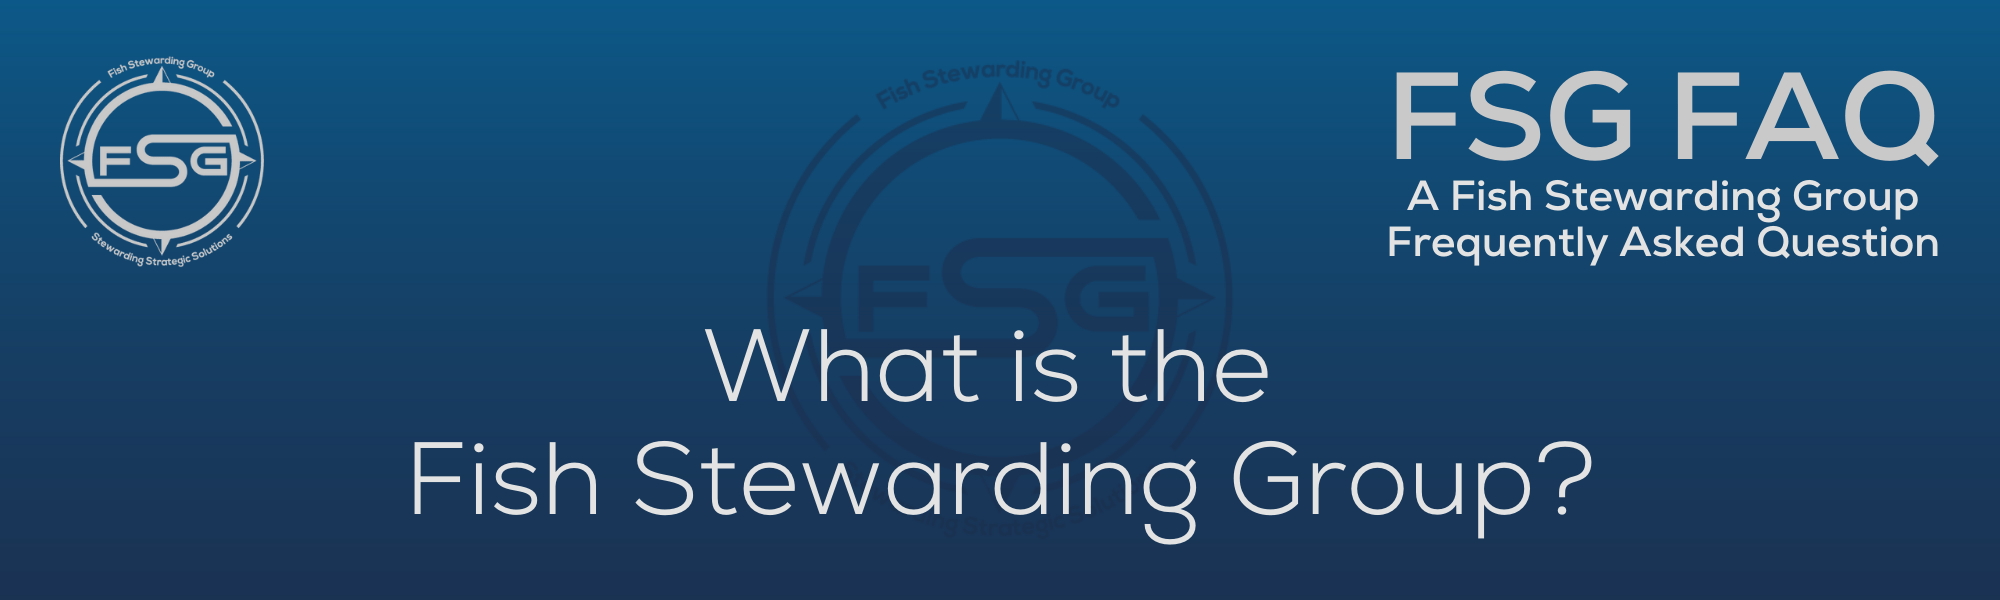 A rectangular and long thing Footer FAQ Image on the bottom of the What is the Fish Stewarding Group? Page on the website. The background is a blue gradient color that goes from a dark blue on the bottom to a lighter blue on top. The text in lower center of the image in a light gray text that reads: What is the Fish Stewarding Group? The text in gray in the upper right corner reads: FSG FAQ. Right beneath that is more gray text in a smaller font that reads: A Fish Stewarding Group Frequently Asked Question. On the upper left side is the FSG Logo in gray. The logo has the letters FSG in the middle with a circle with four pointed arrows facing north, south, east and west with the S connected to that circle. Four rounded lines make the next circle of the circle and the last layer is a thin circle with the text on the Bottom that reads Stewarding Strategist Solutions and on top, the text reads Fish Stewarding Group. And Lastly in the center background of the image is a watermarked FSG logo, faded in blue, in the background.